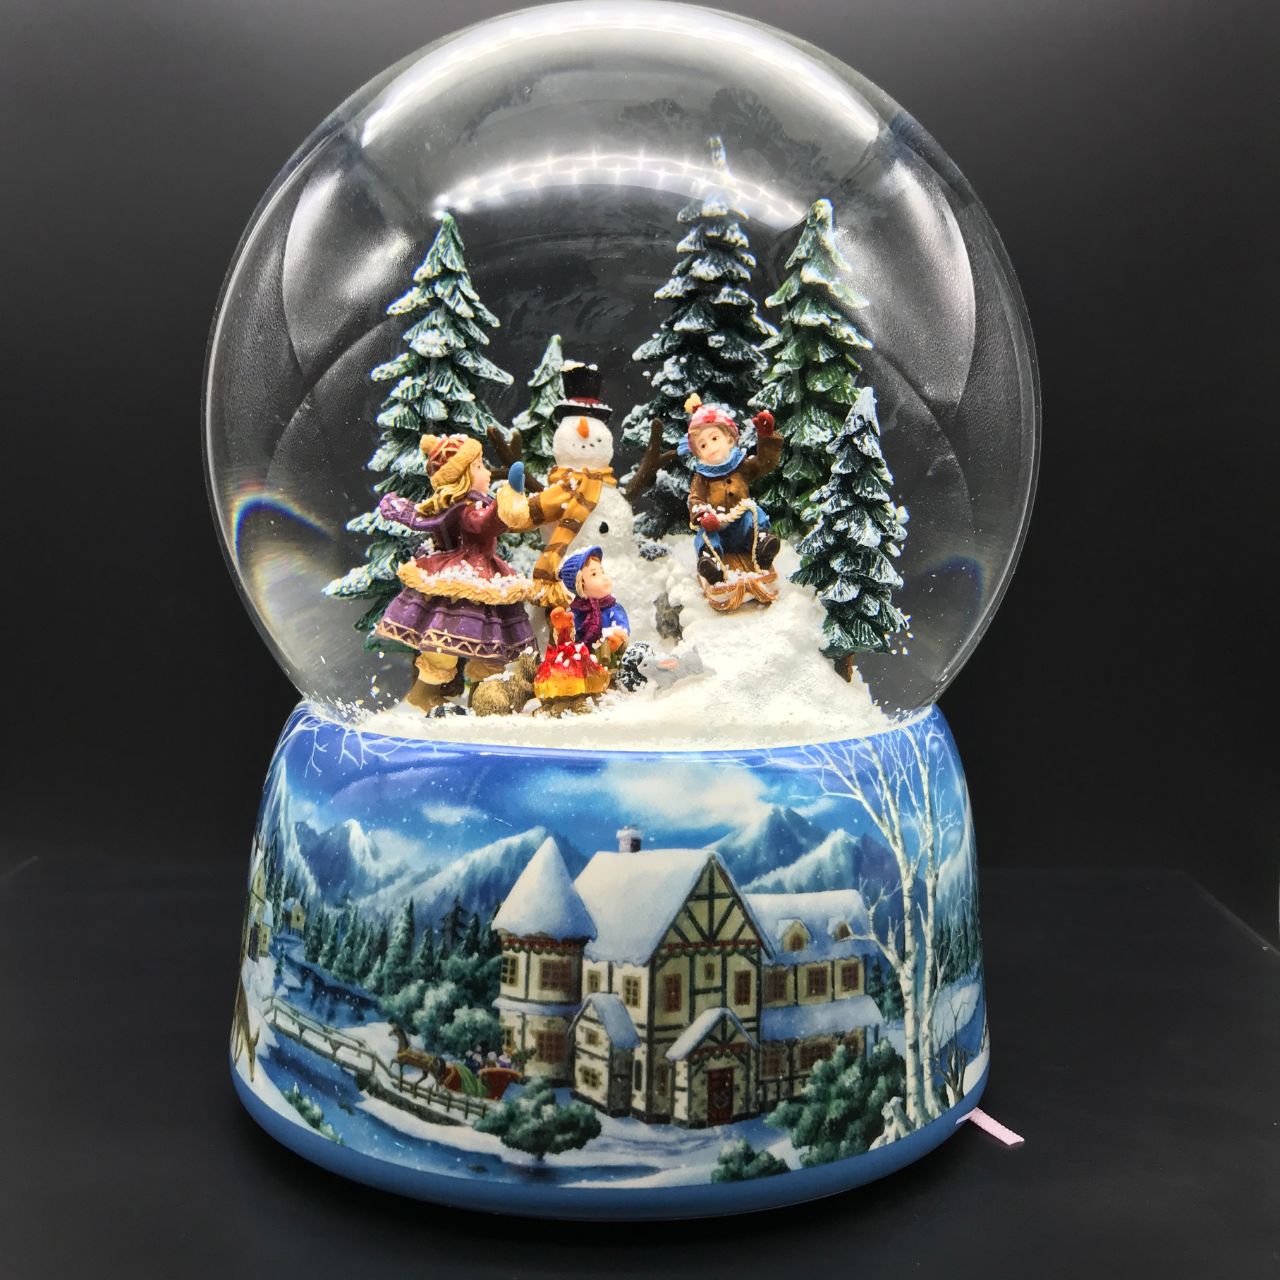 Music Box World Snow Globe Snowman - Large  Snowman snow globe plays the melody “Leise Rieselt der Schnee”. The snow swirls automatically and the camp fire lights up.  Melody: Leise Rieselt der Schnee